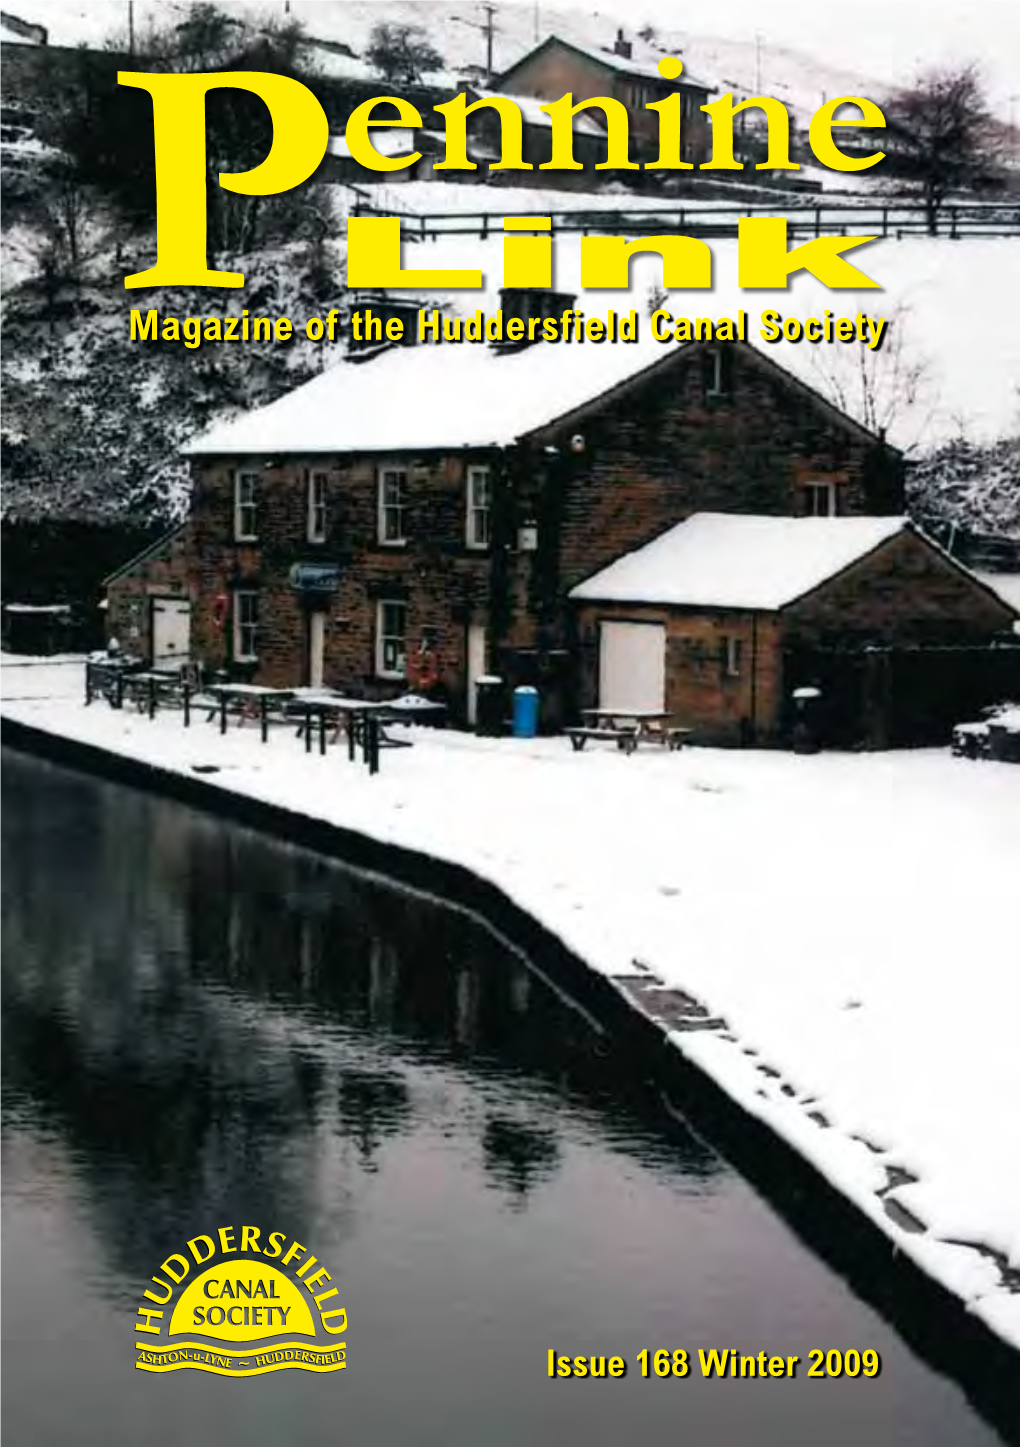 Magazine of the Huddersfield Canal Society